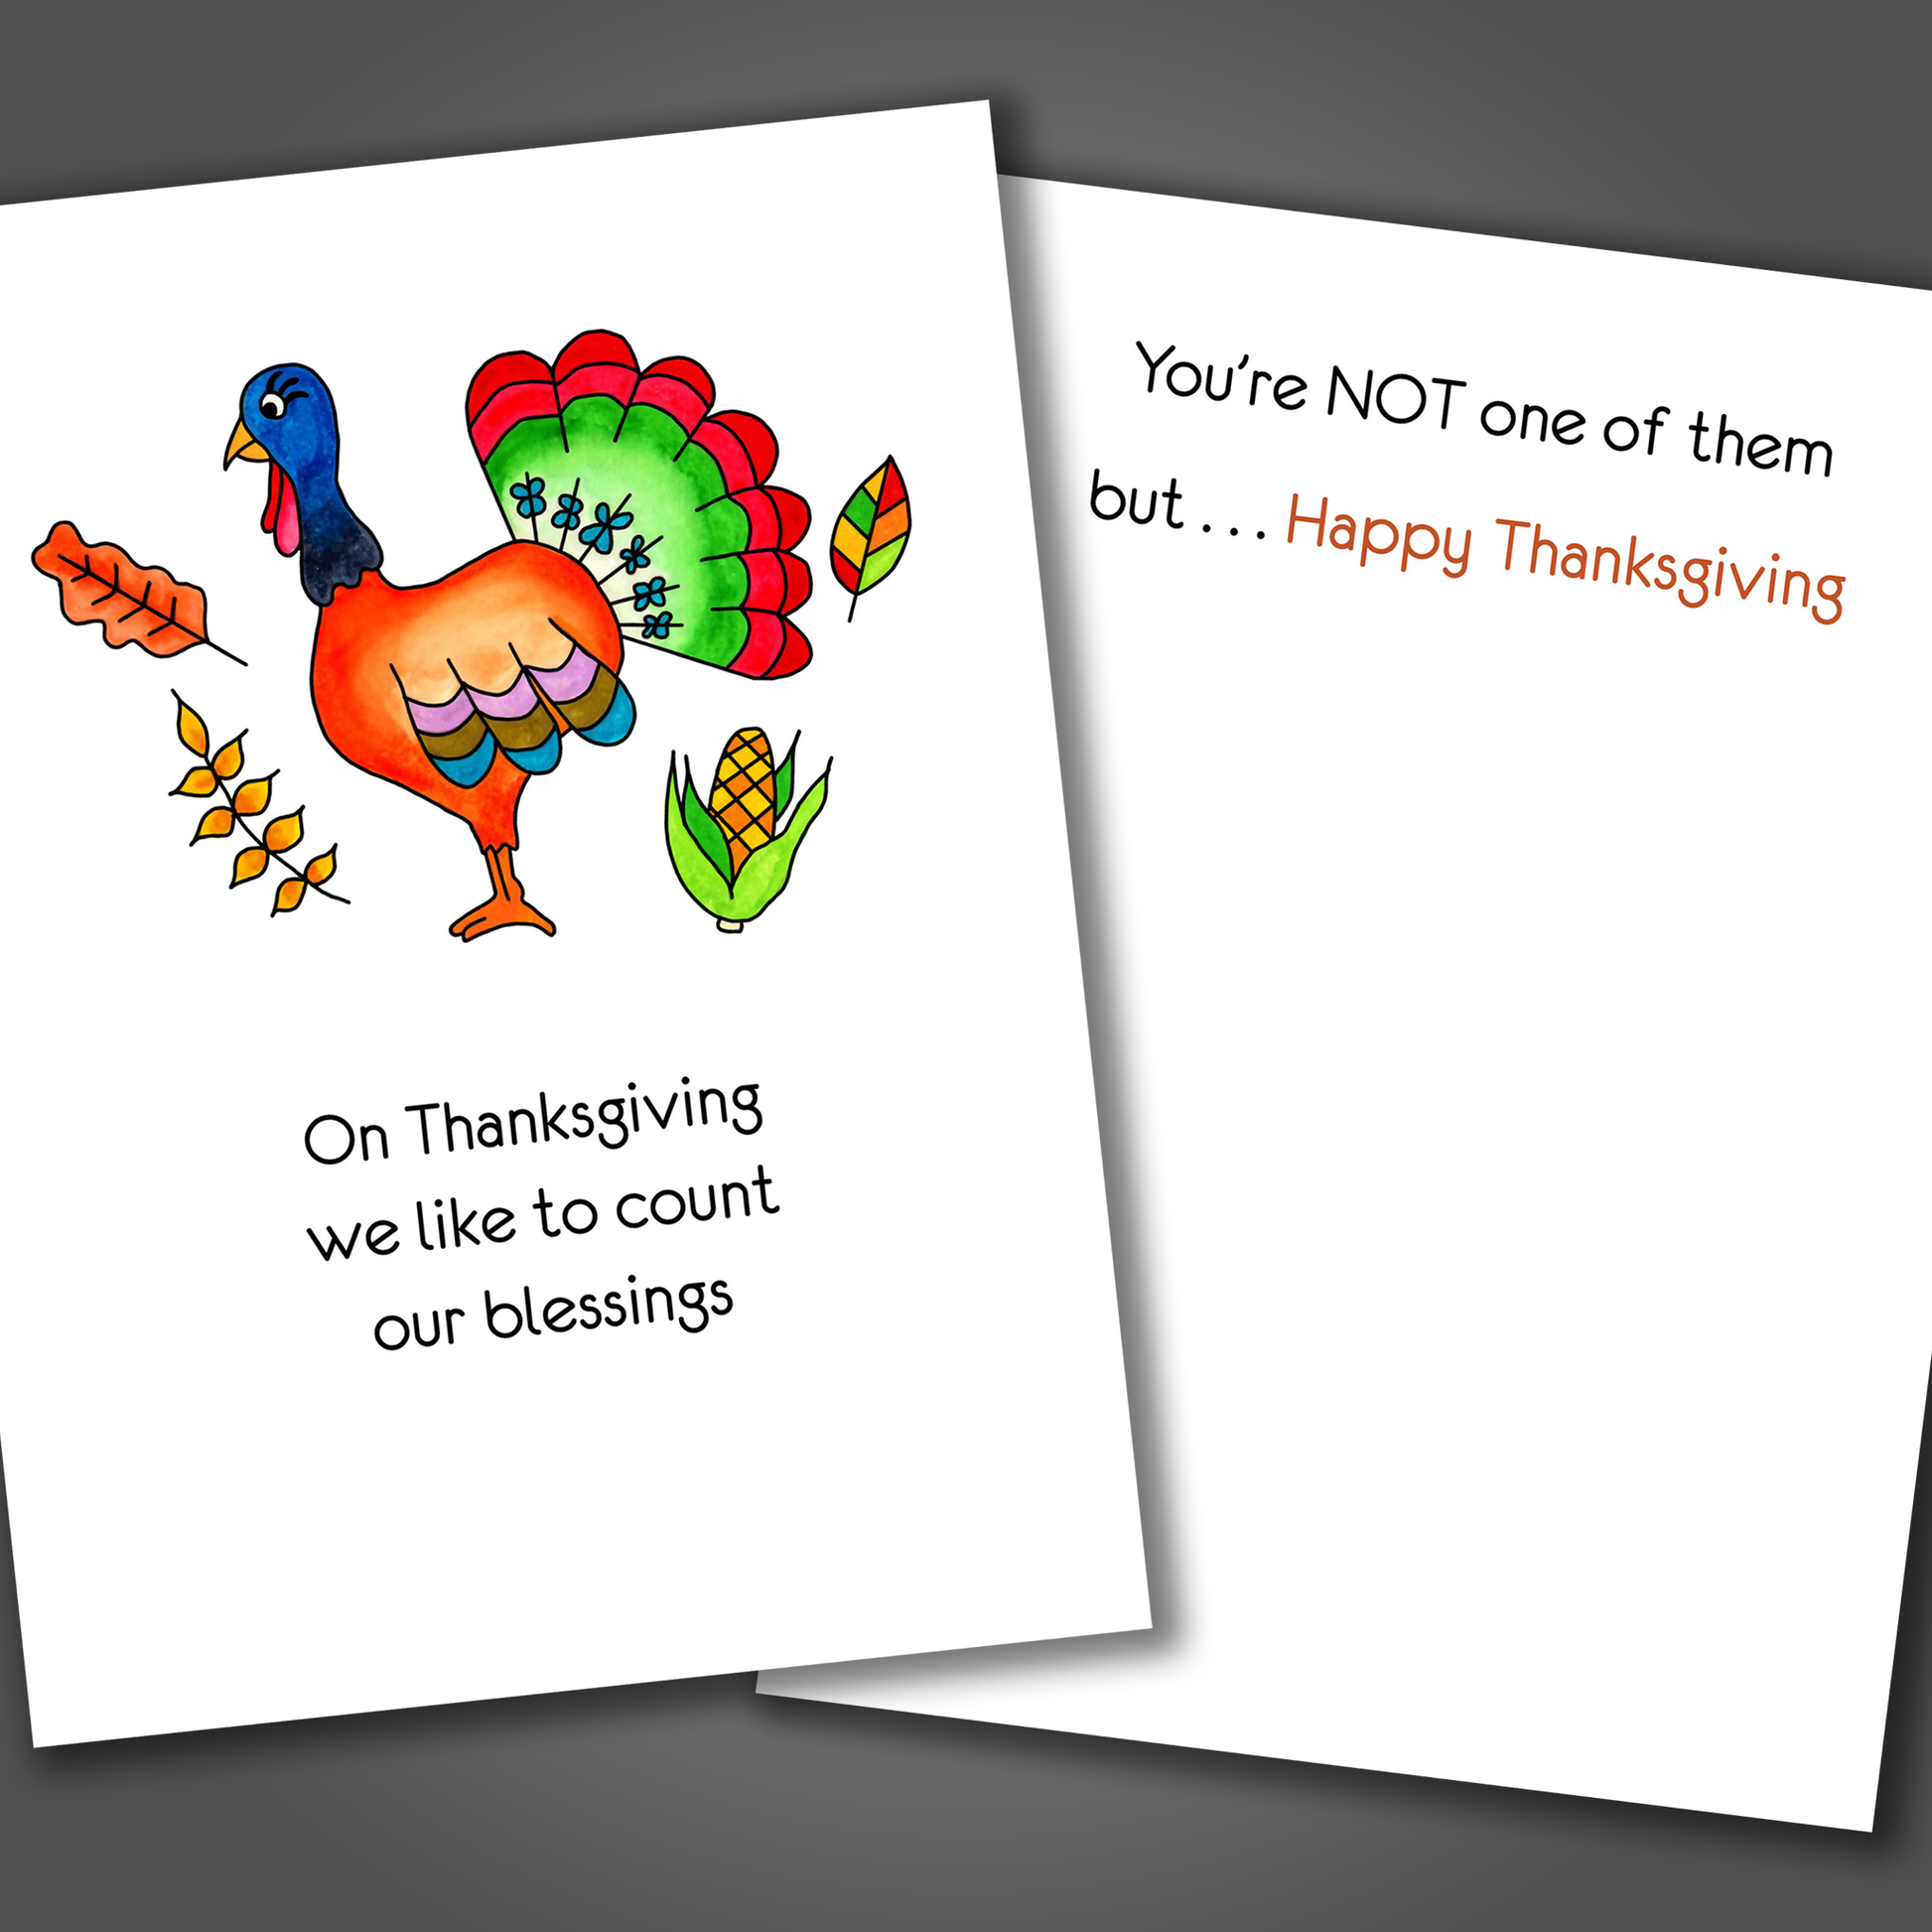 Funny Thanksgiving card with a turkey and corn drawn on the front of the card. Inside the card is a funny joke that says you are not a blessing, but happy Thanksgiving!